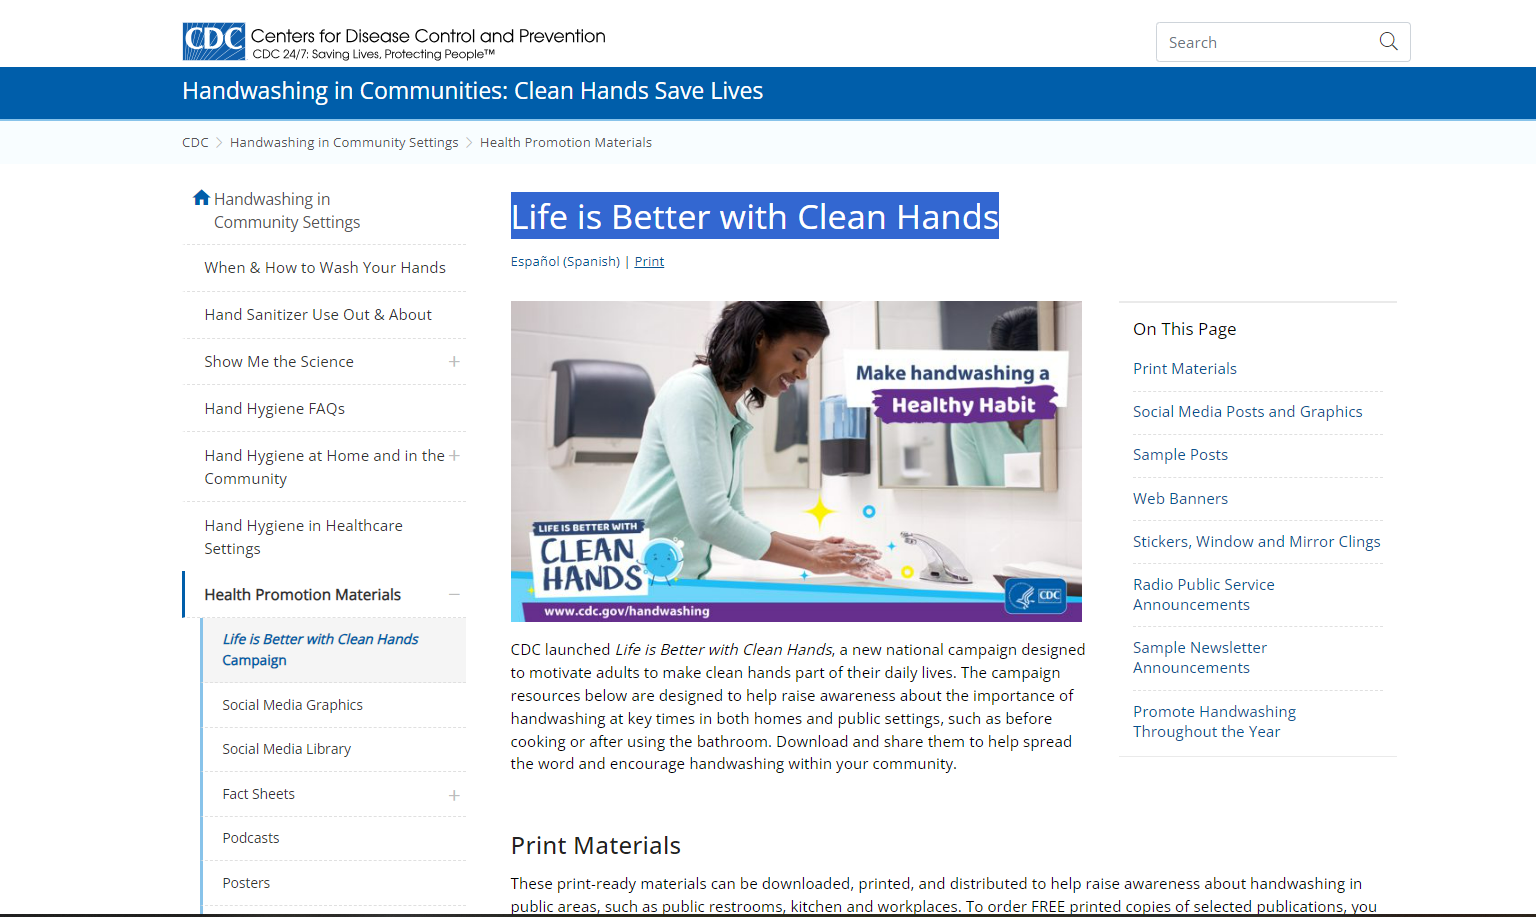 Screen capture of the web page, with a picture of a woman smiling and washing her hands.